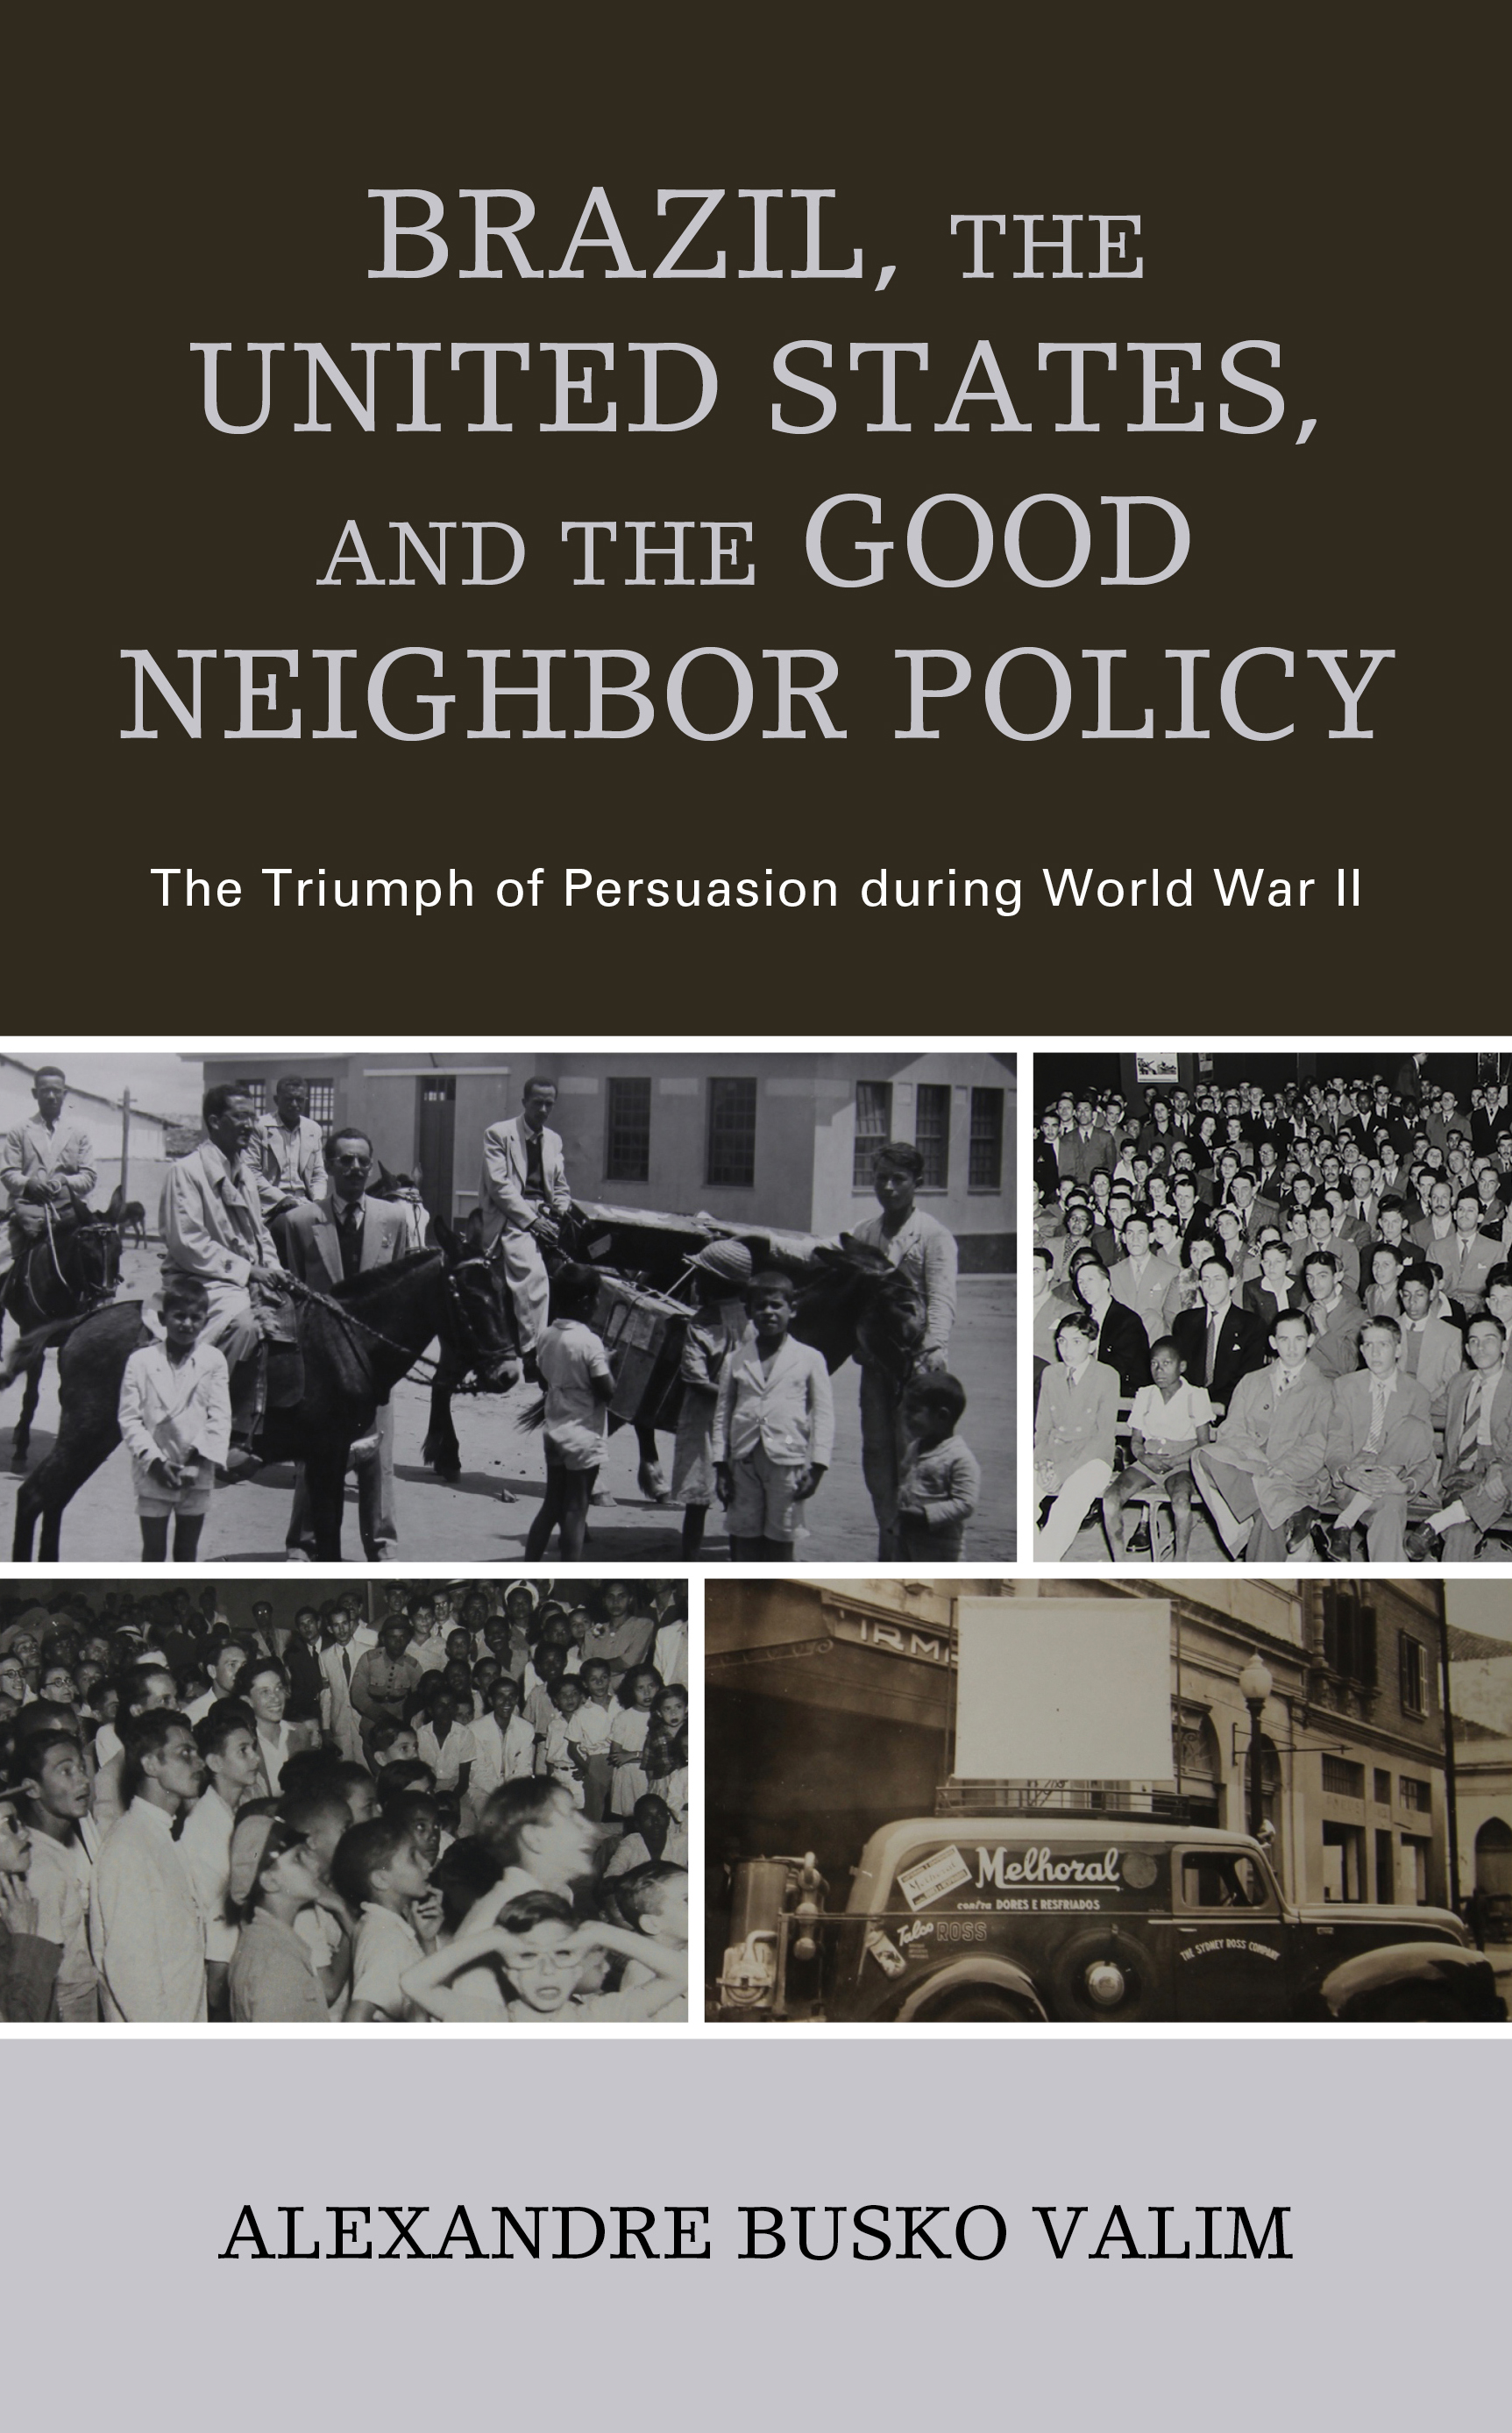 Brazil, the United States, and the Good Neighbor Policy: The Triumph of Persuasion during World War II